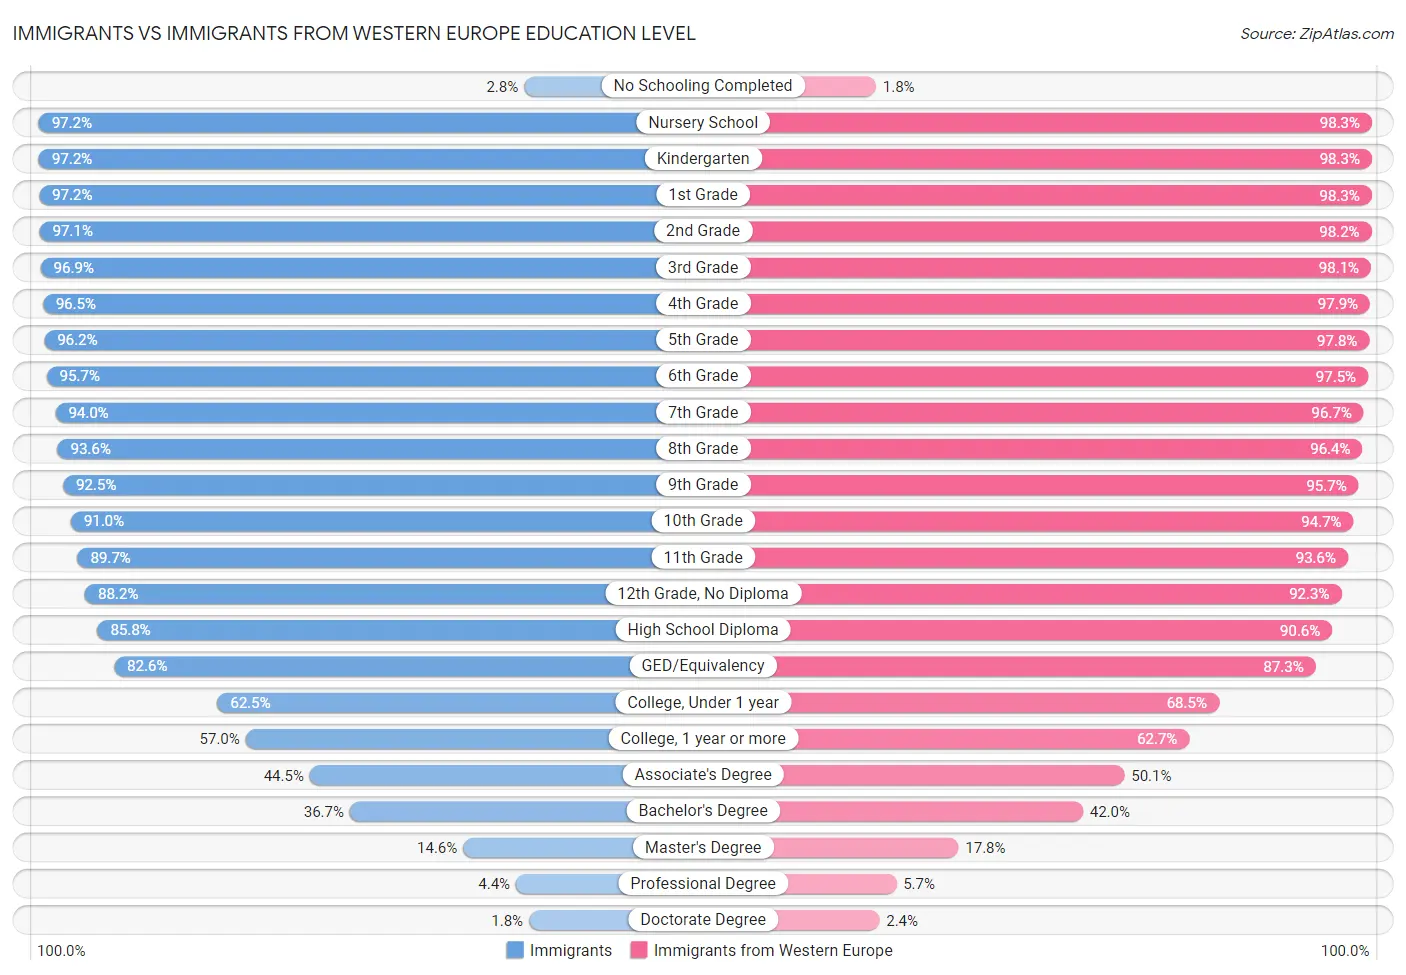 Immigrants vs Immigrants from Western Europe Education Level